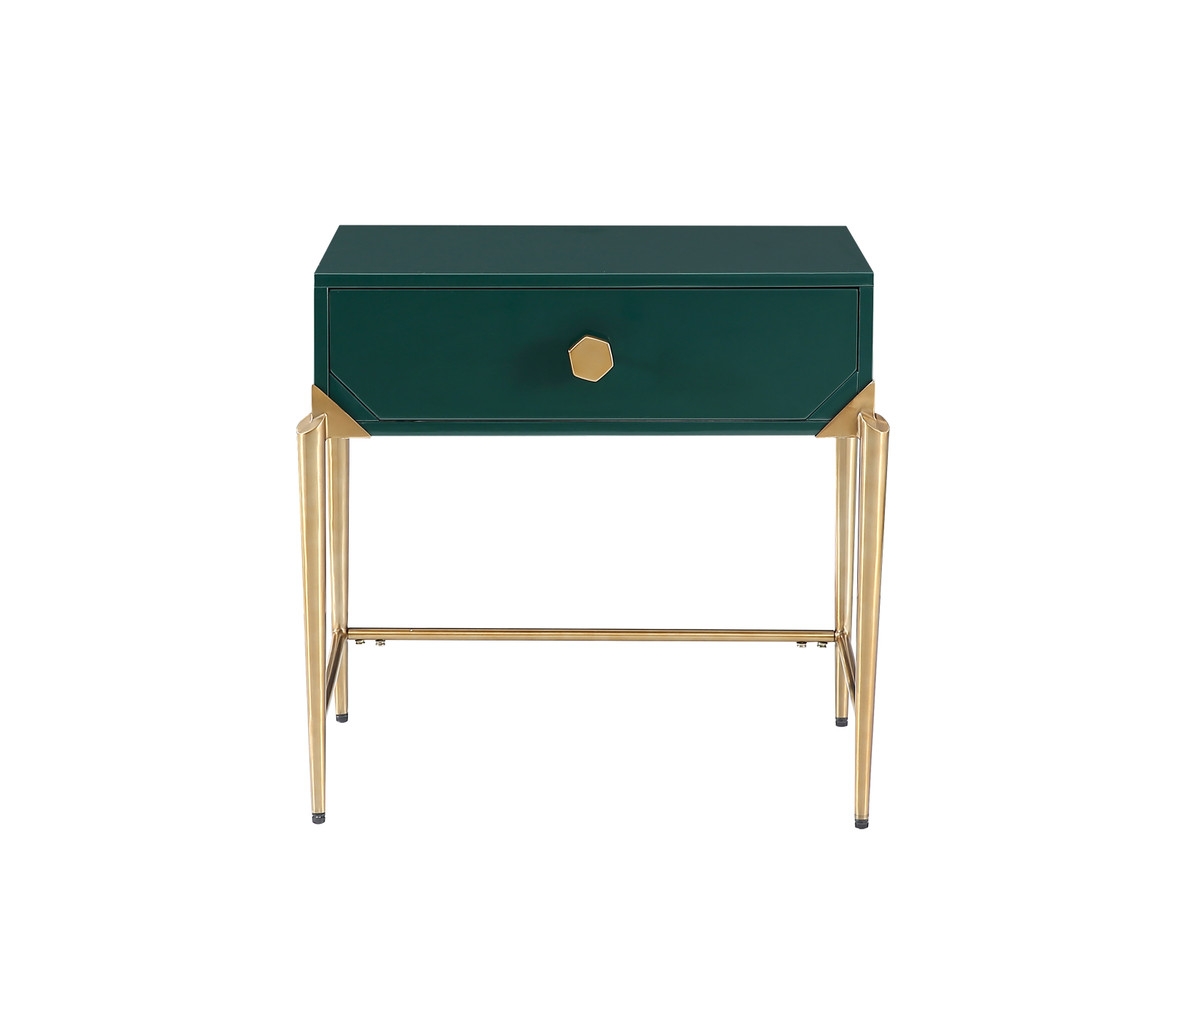 Camryn Green Lacquer Side Table - Image 1